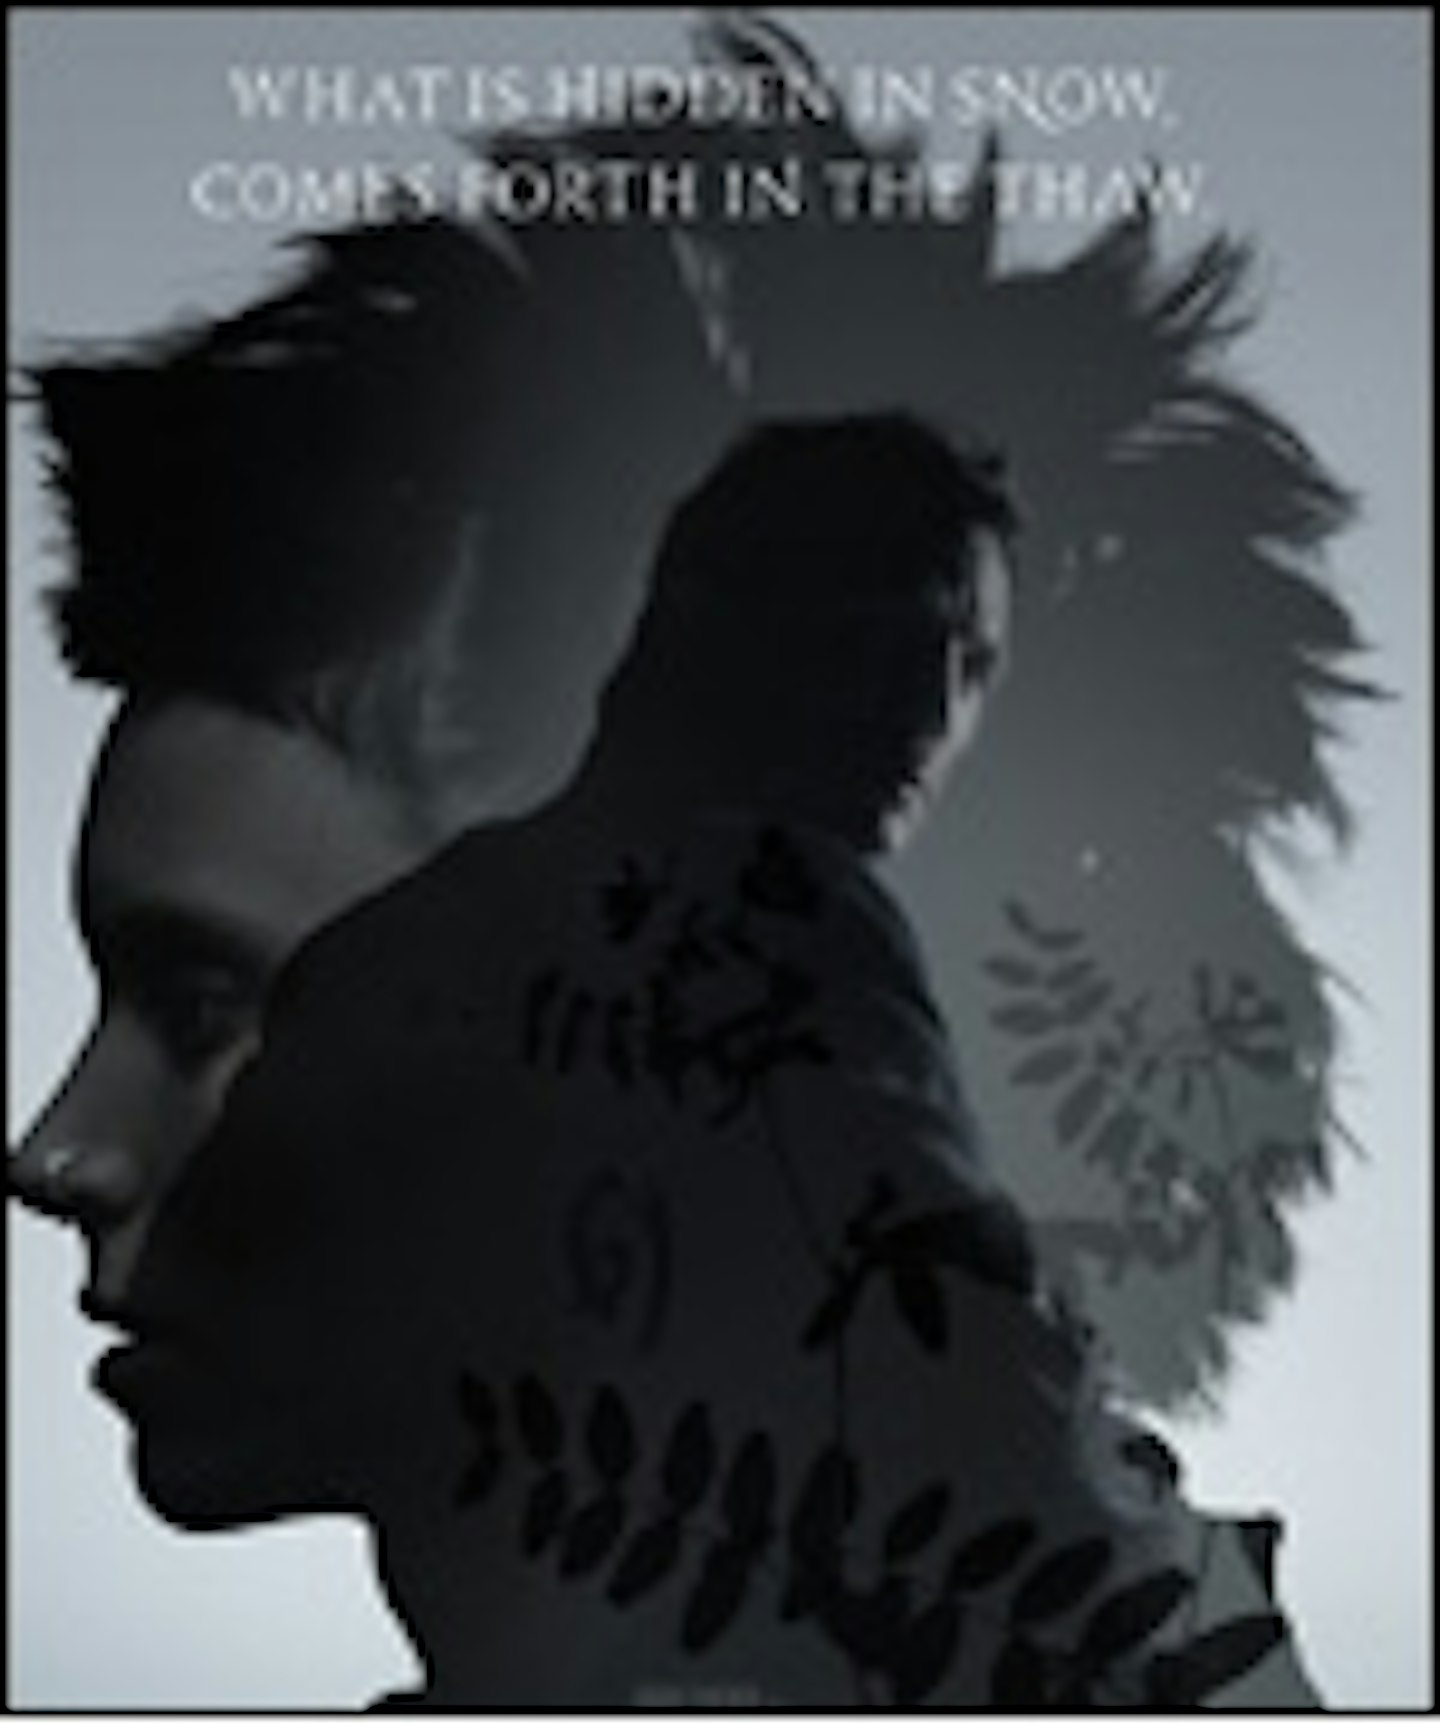 New Dragon Tattoo Poster Comes Forth